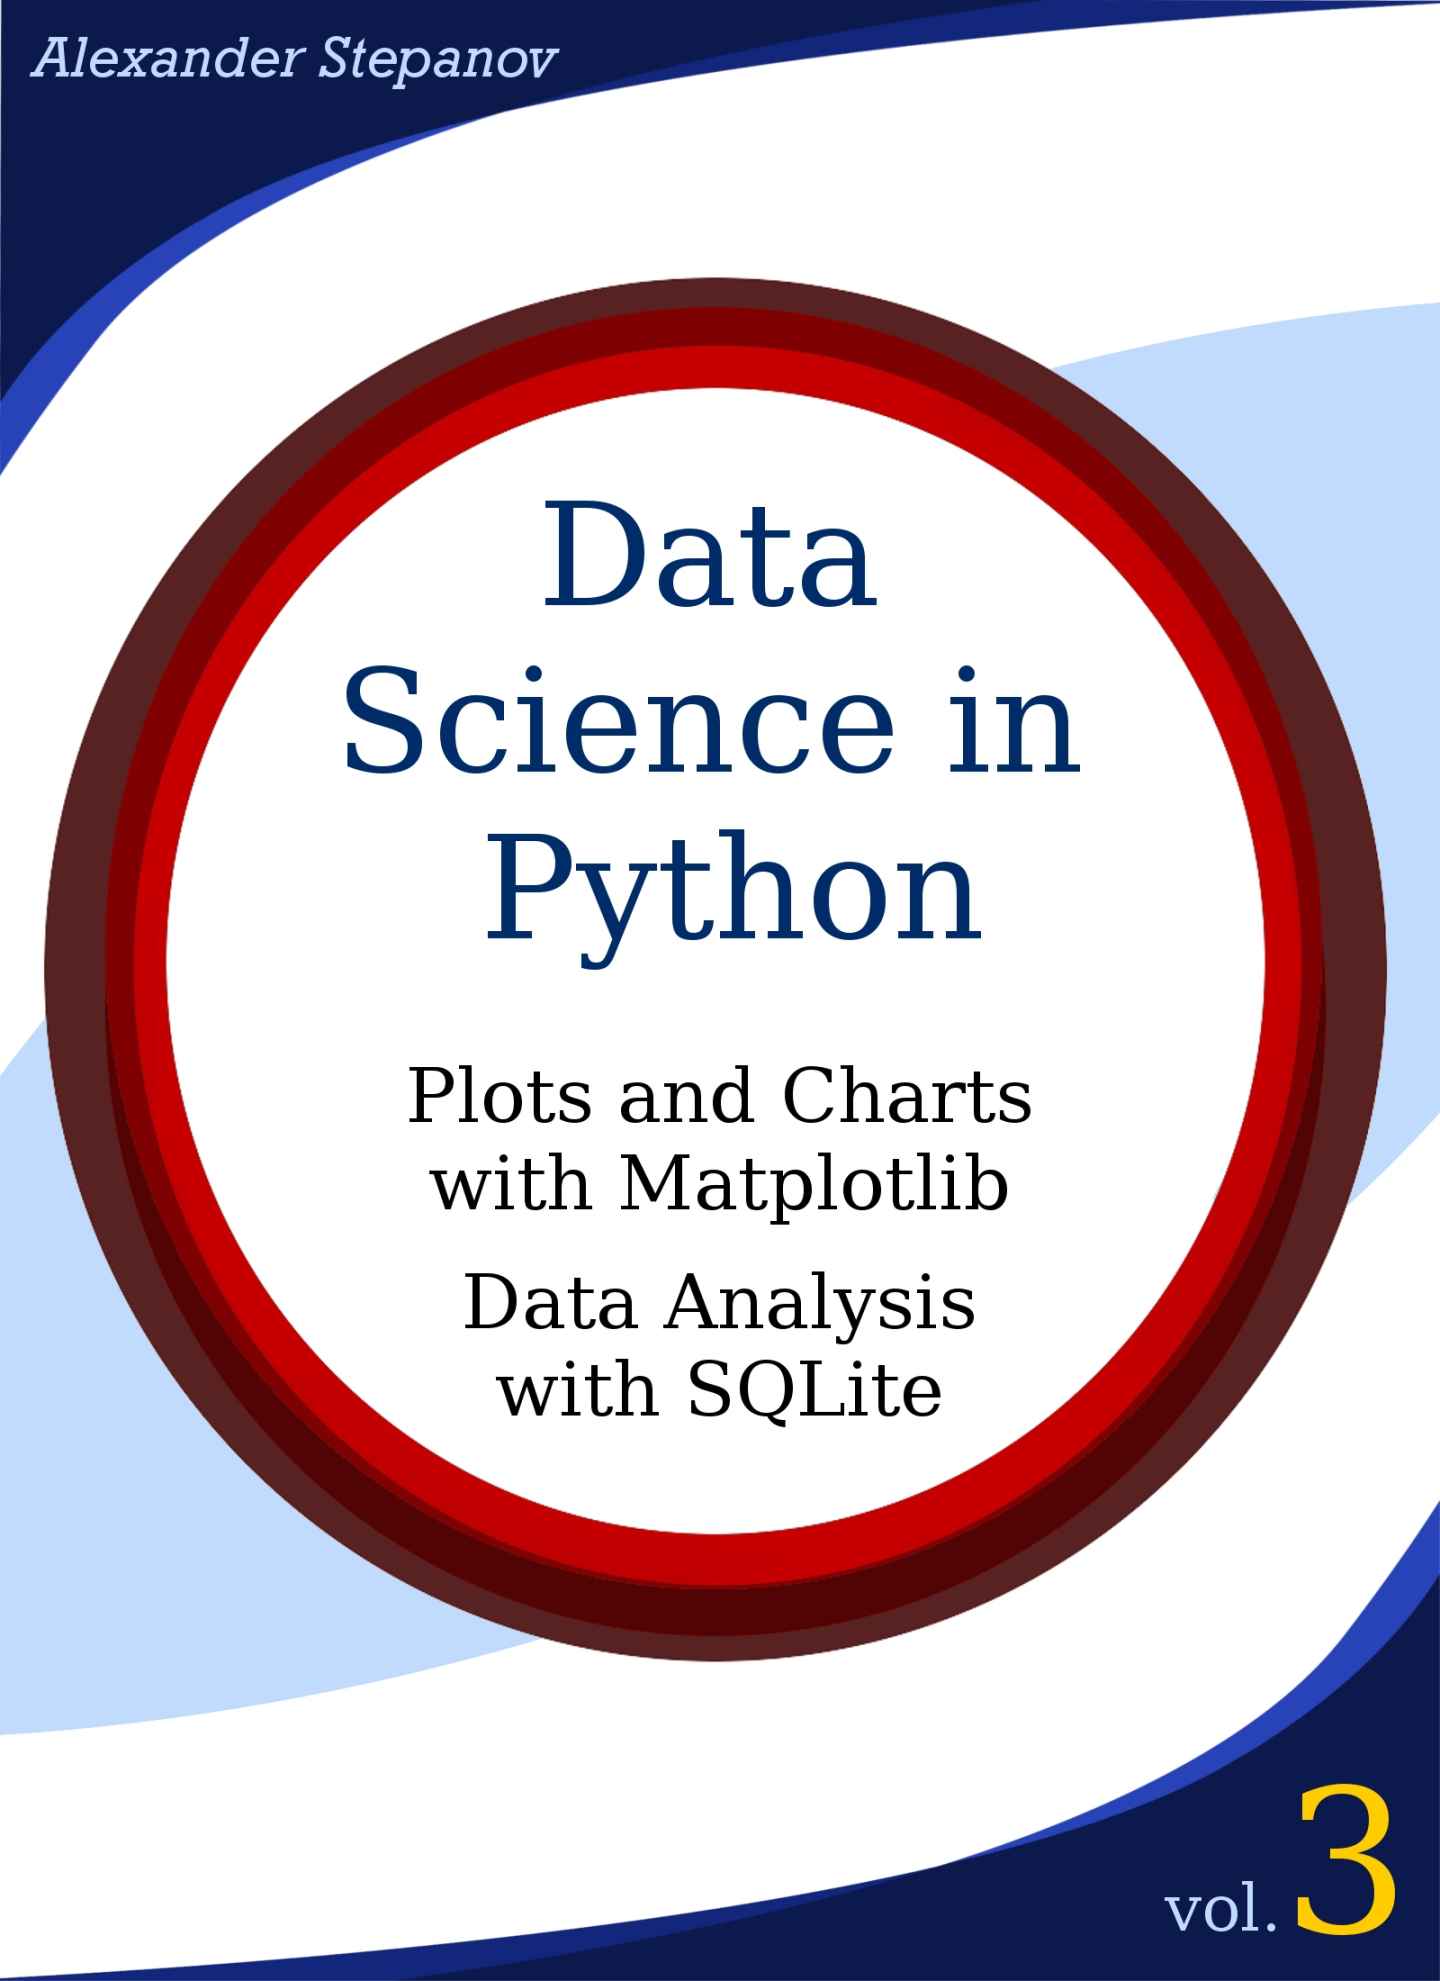 Data Science in Python. Volume 2: Plots and Charts with Matplotlib, Data Analysis with Python and SQLite